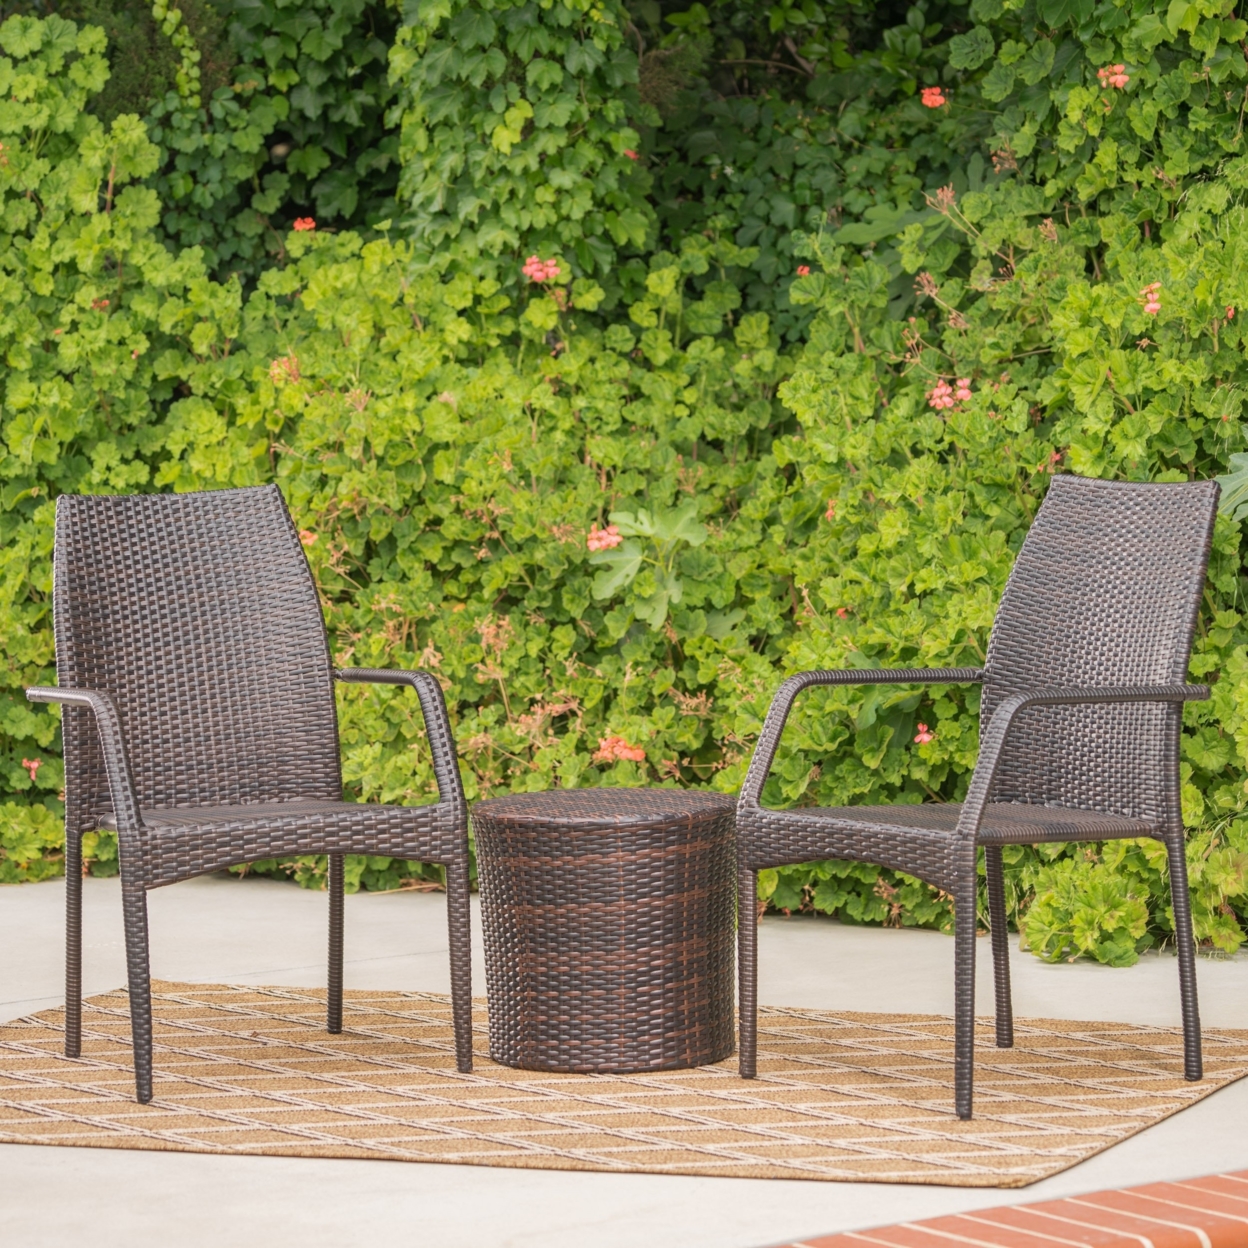 Dawson Outdoor 3 Piece Multi-brown Wicker Stacking Chair Chat Set - Hour Glass Table, Brown